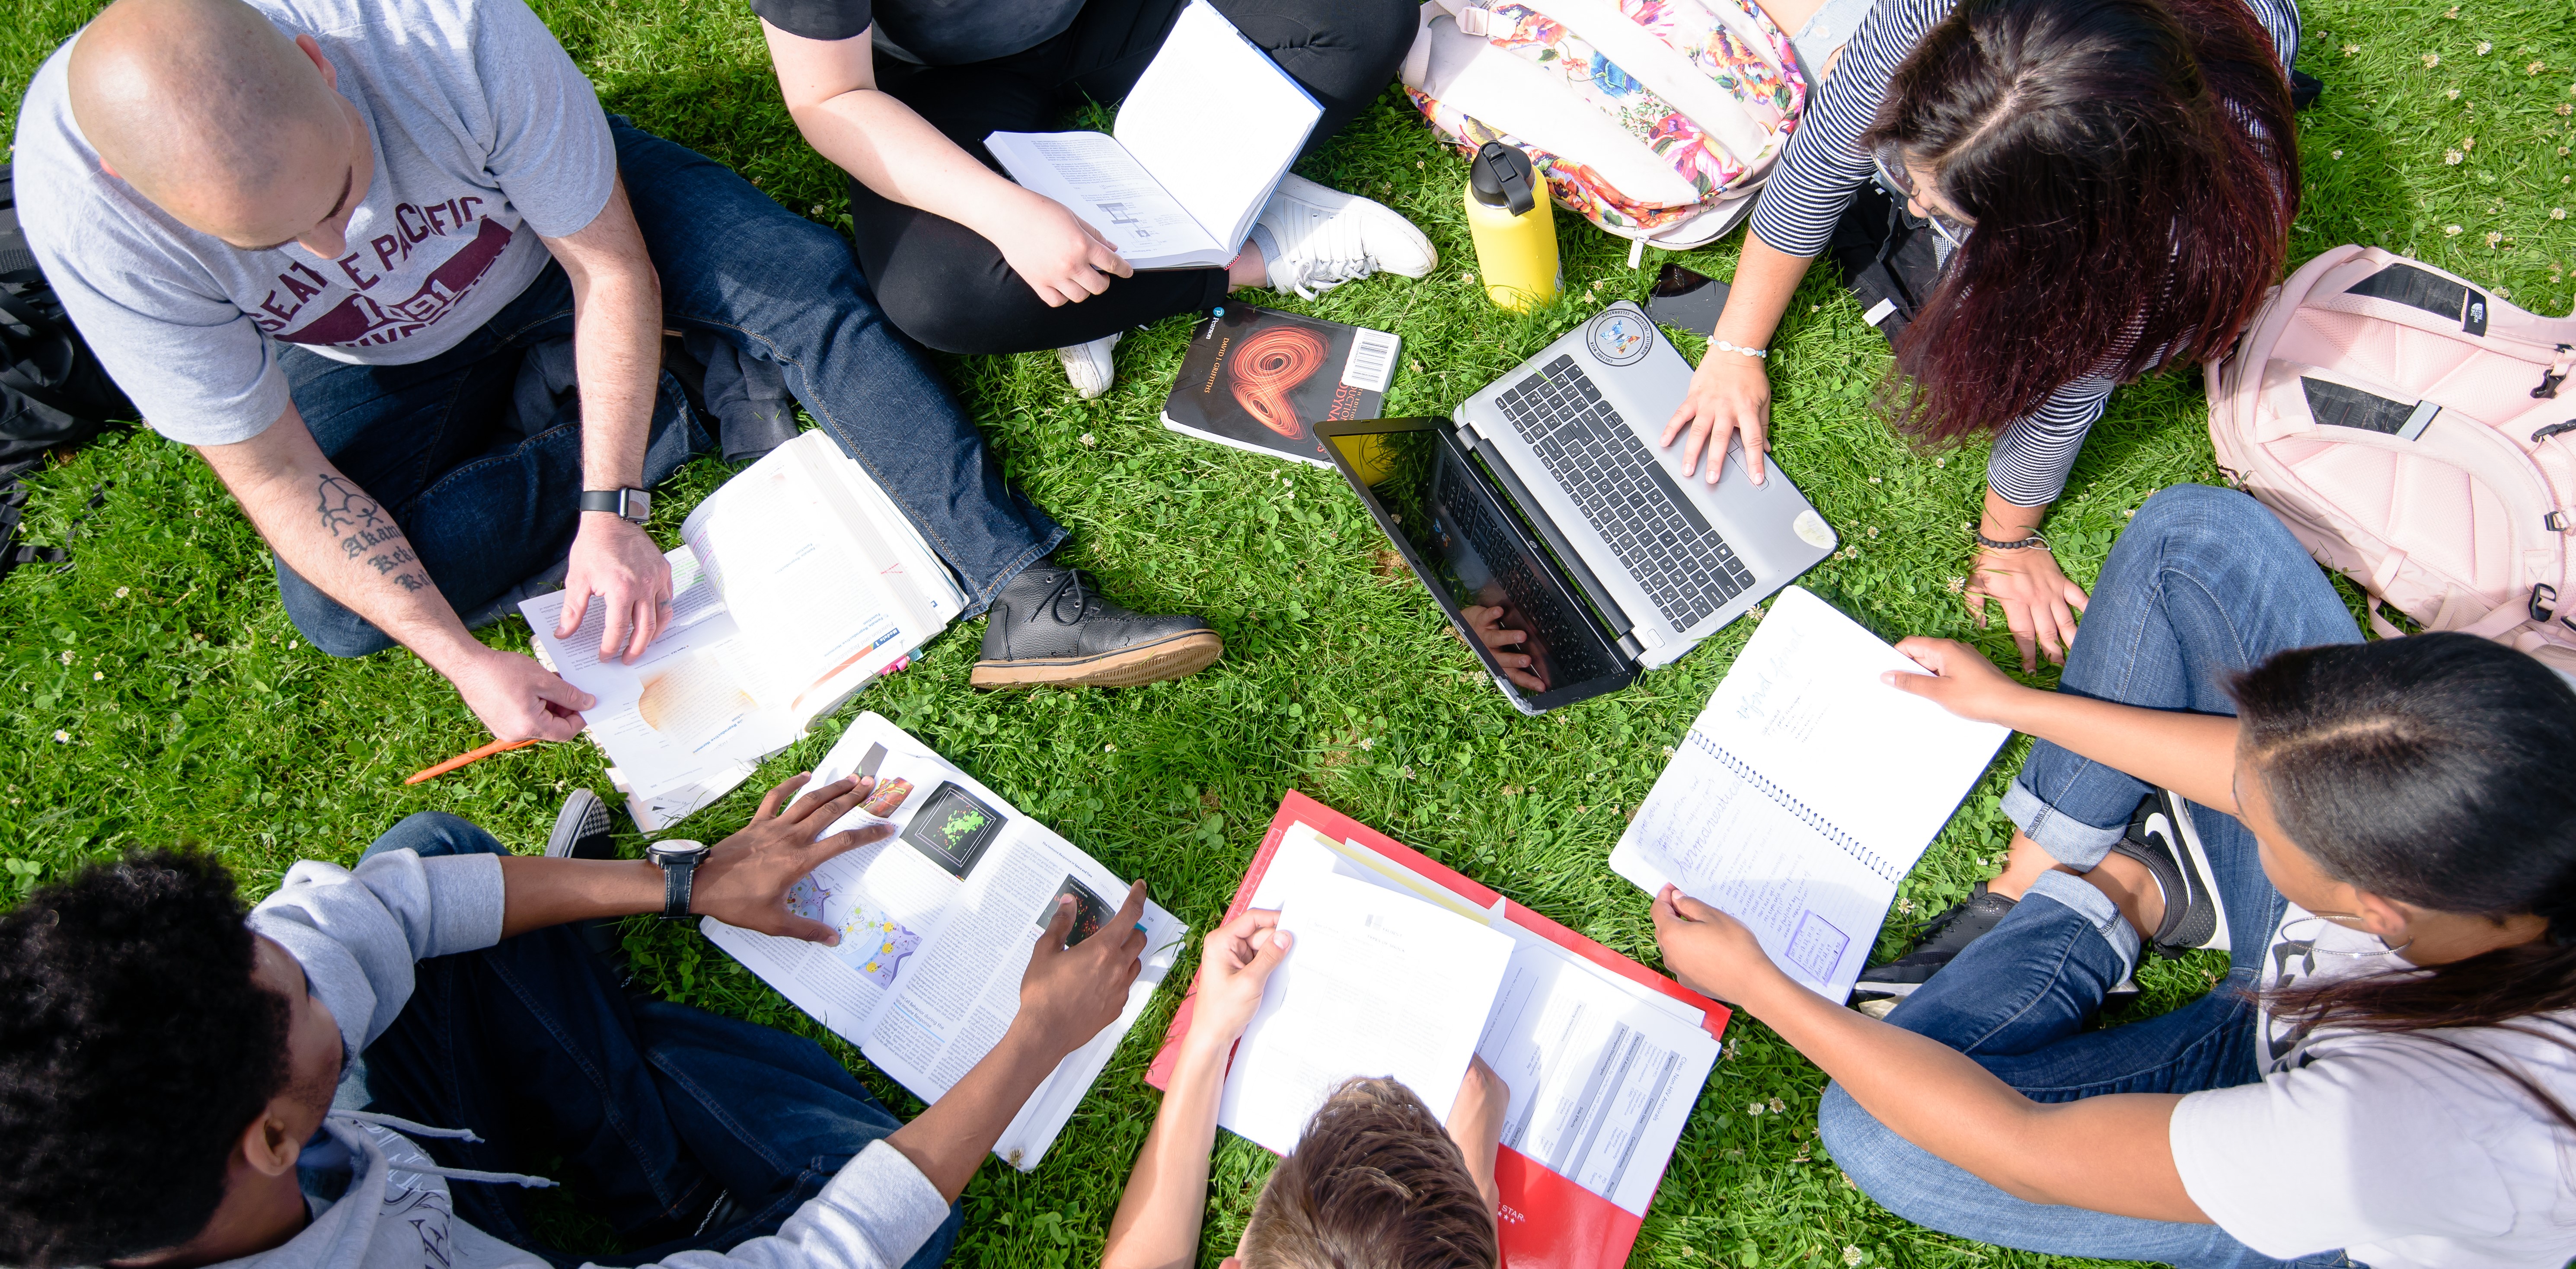 Six students sit in the grass studying together with their books and computers open in front of them.